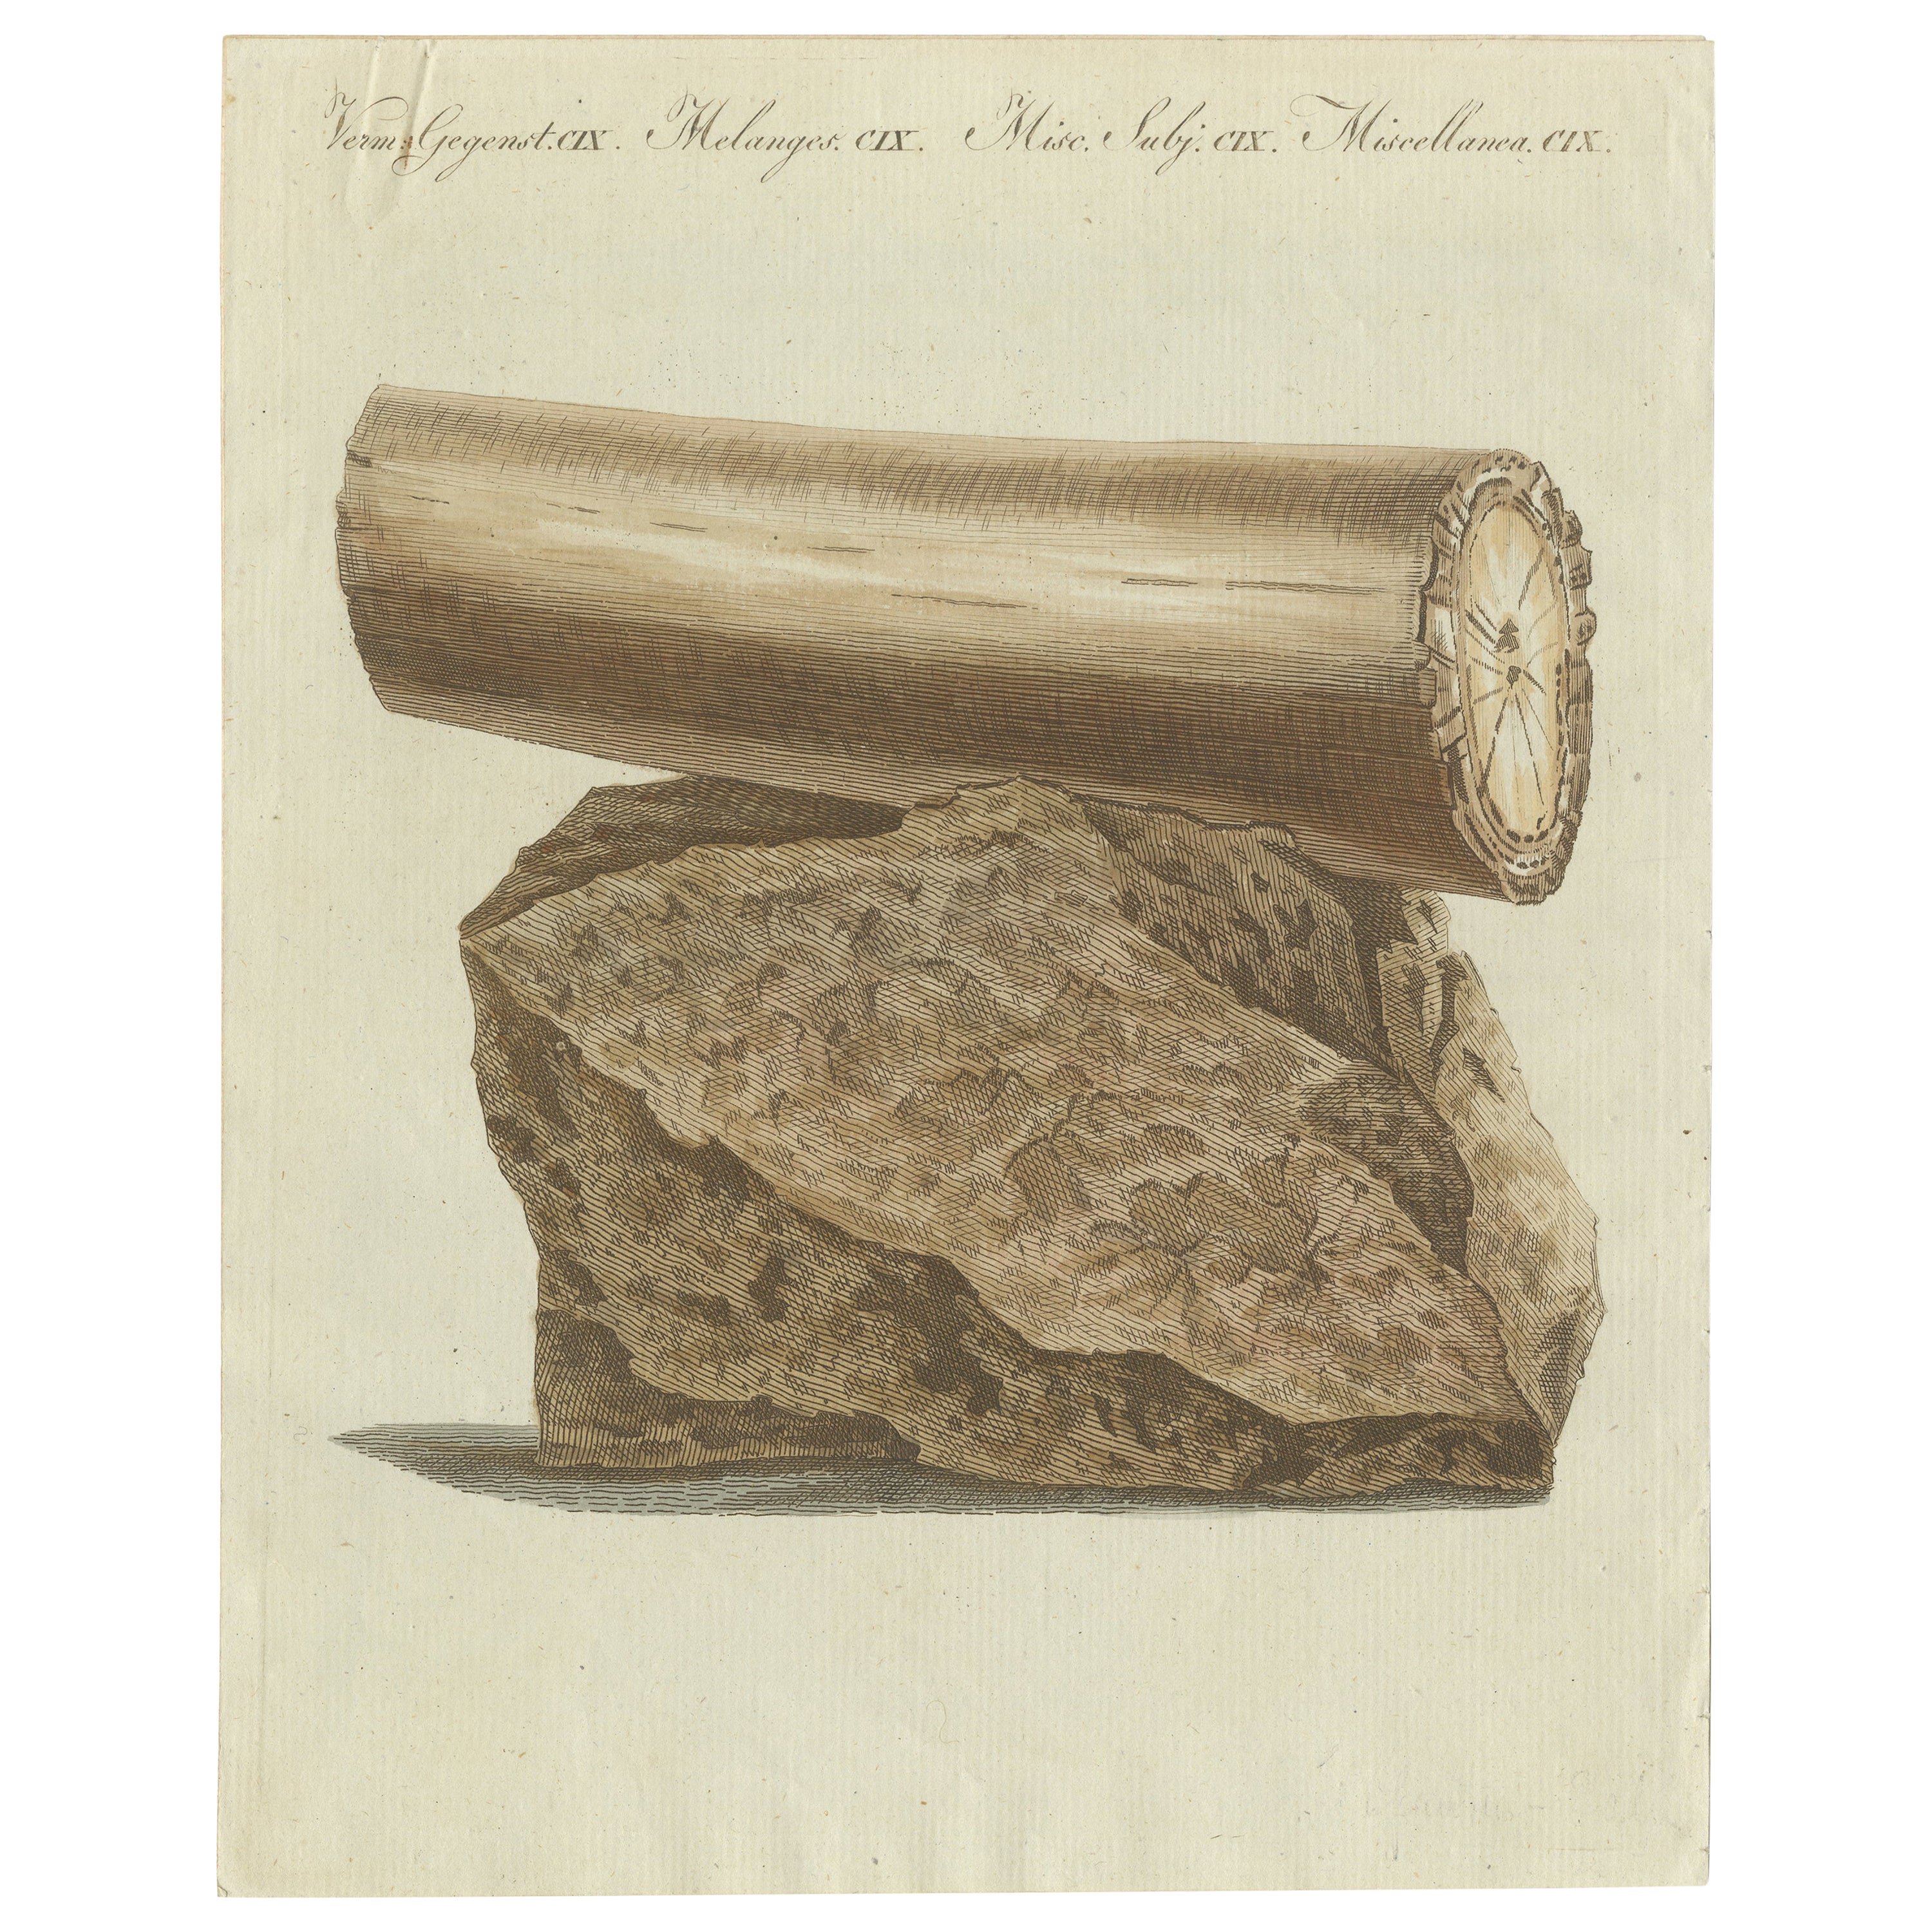 Antique Print of Part of an Excavated Elephant Tusk For Sale